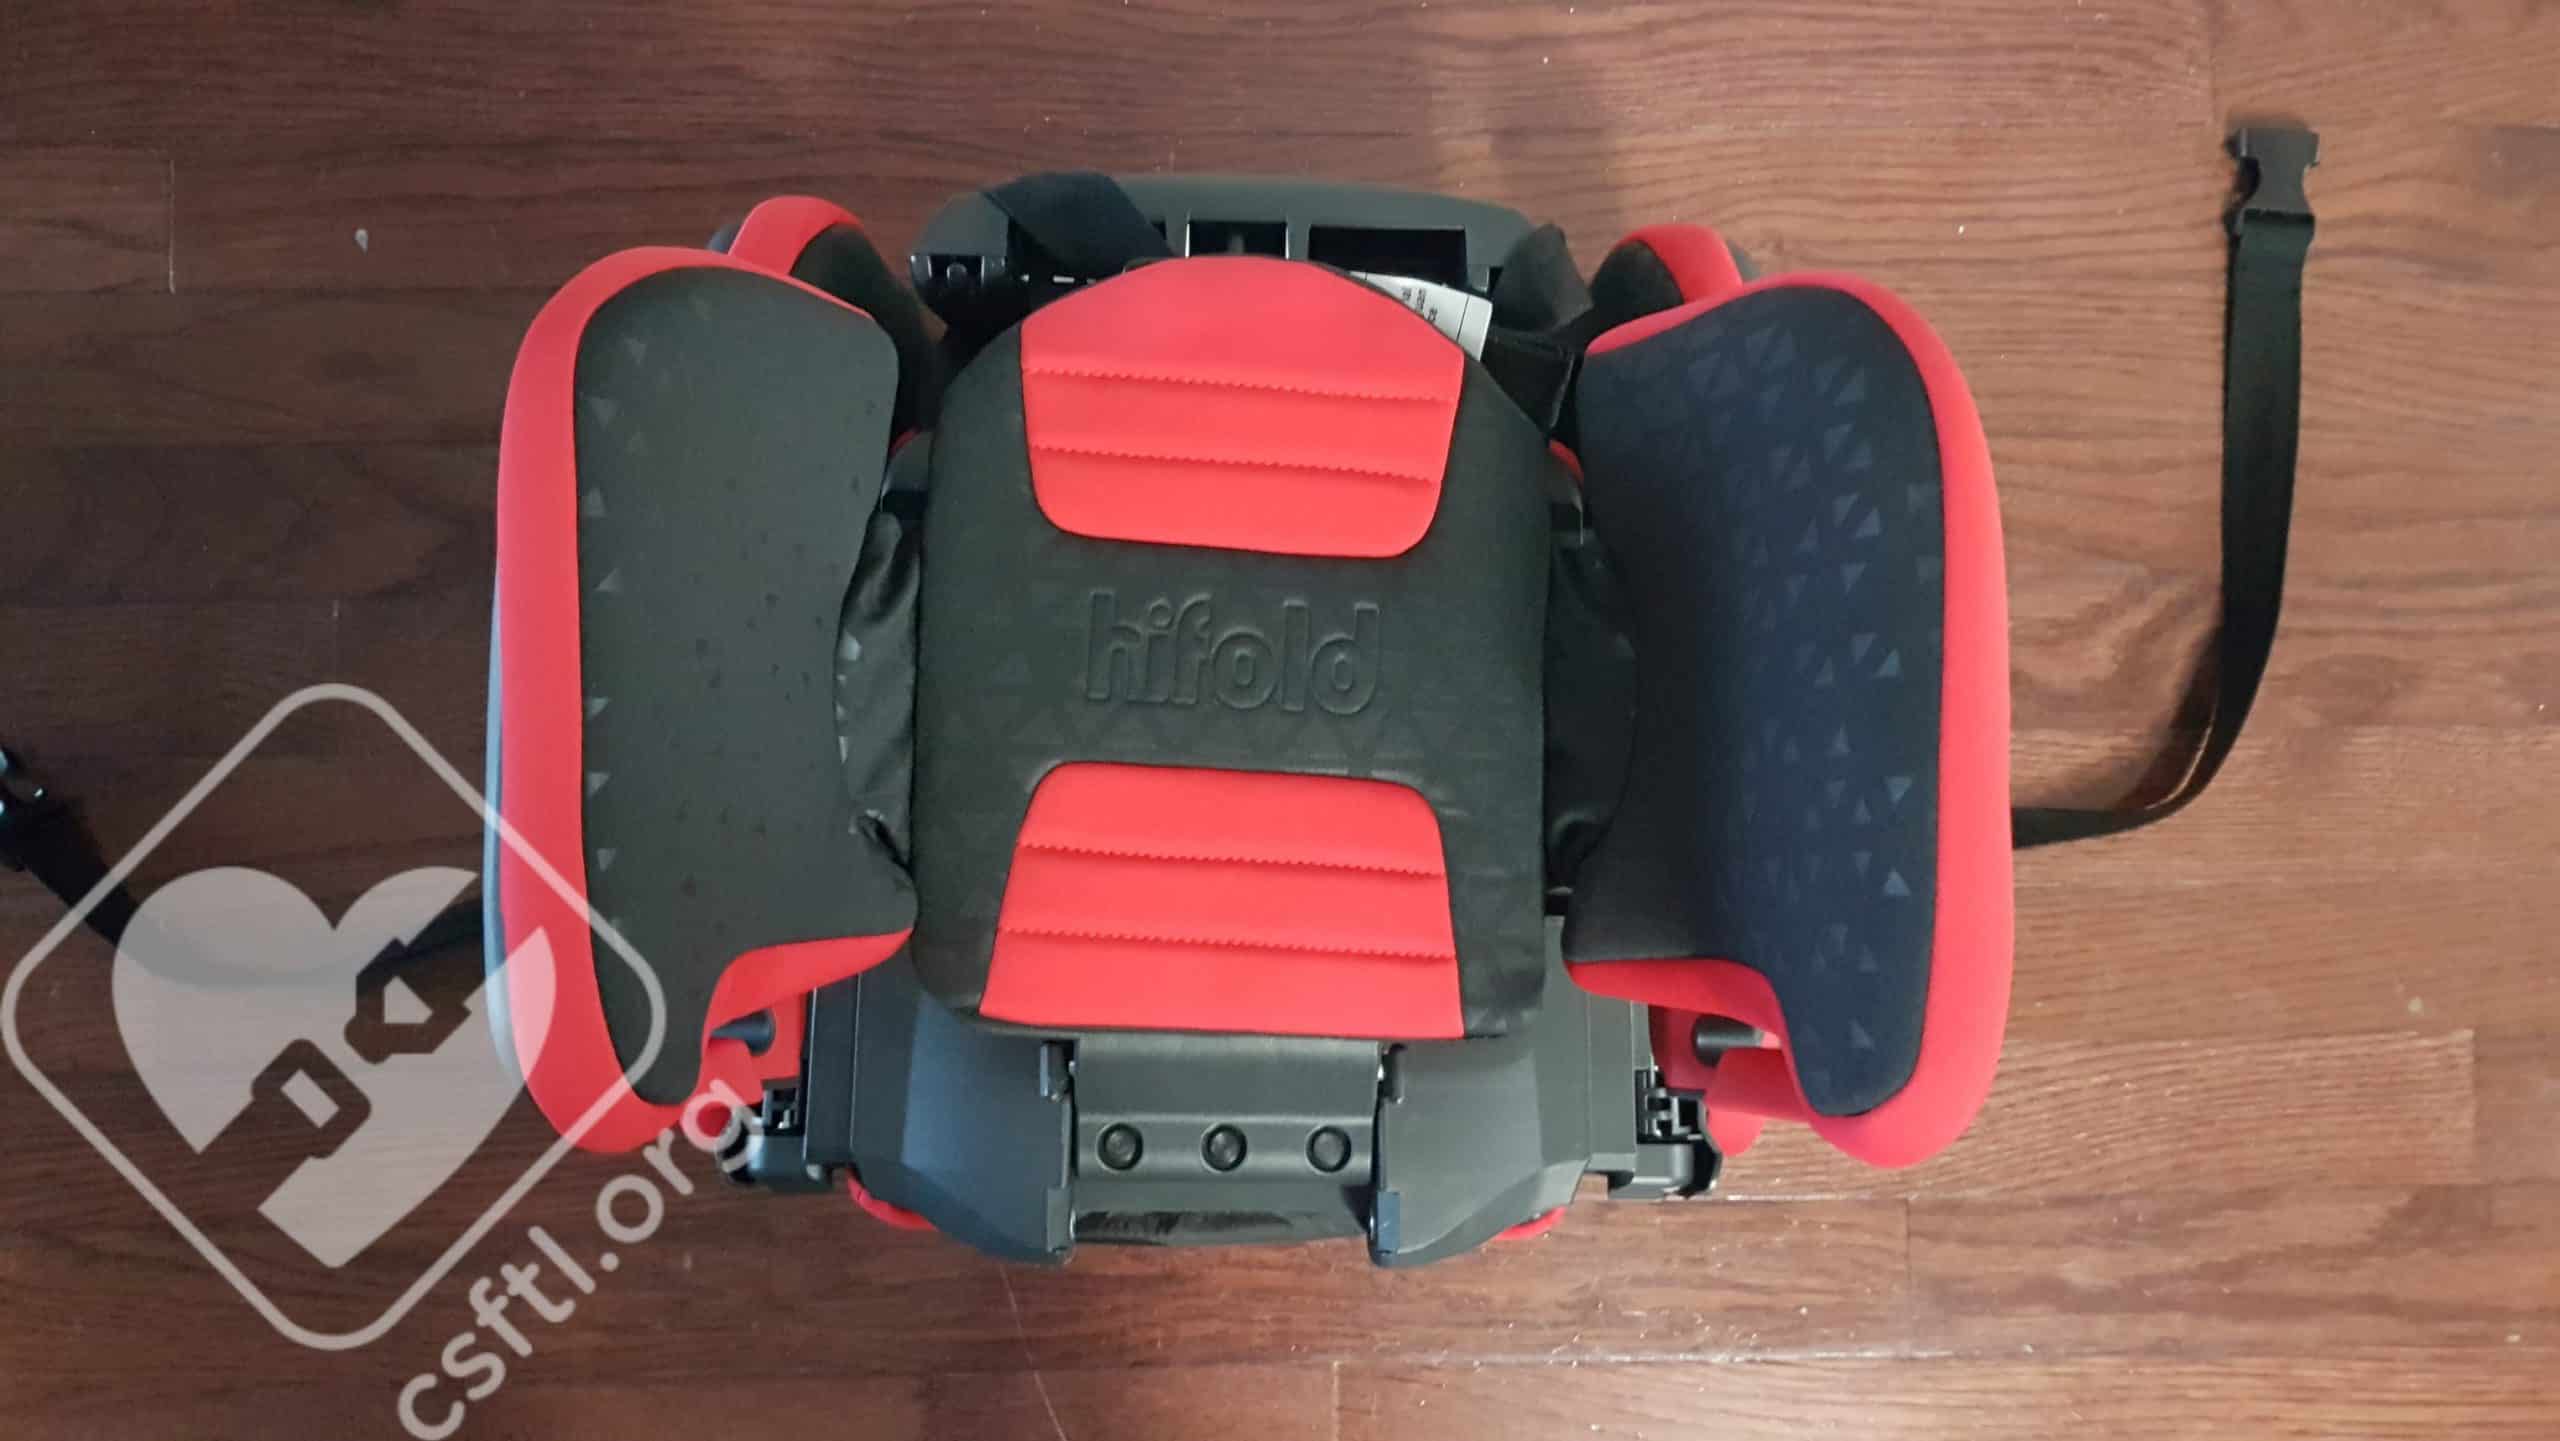 Hifold REVIEW: is this the BEST folding car seat? - TraveLynn Family